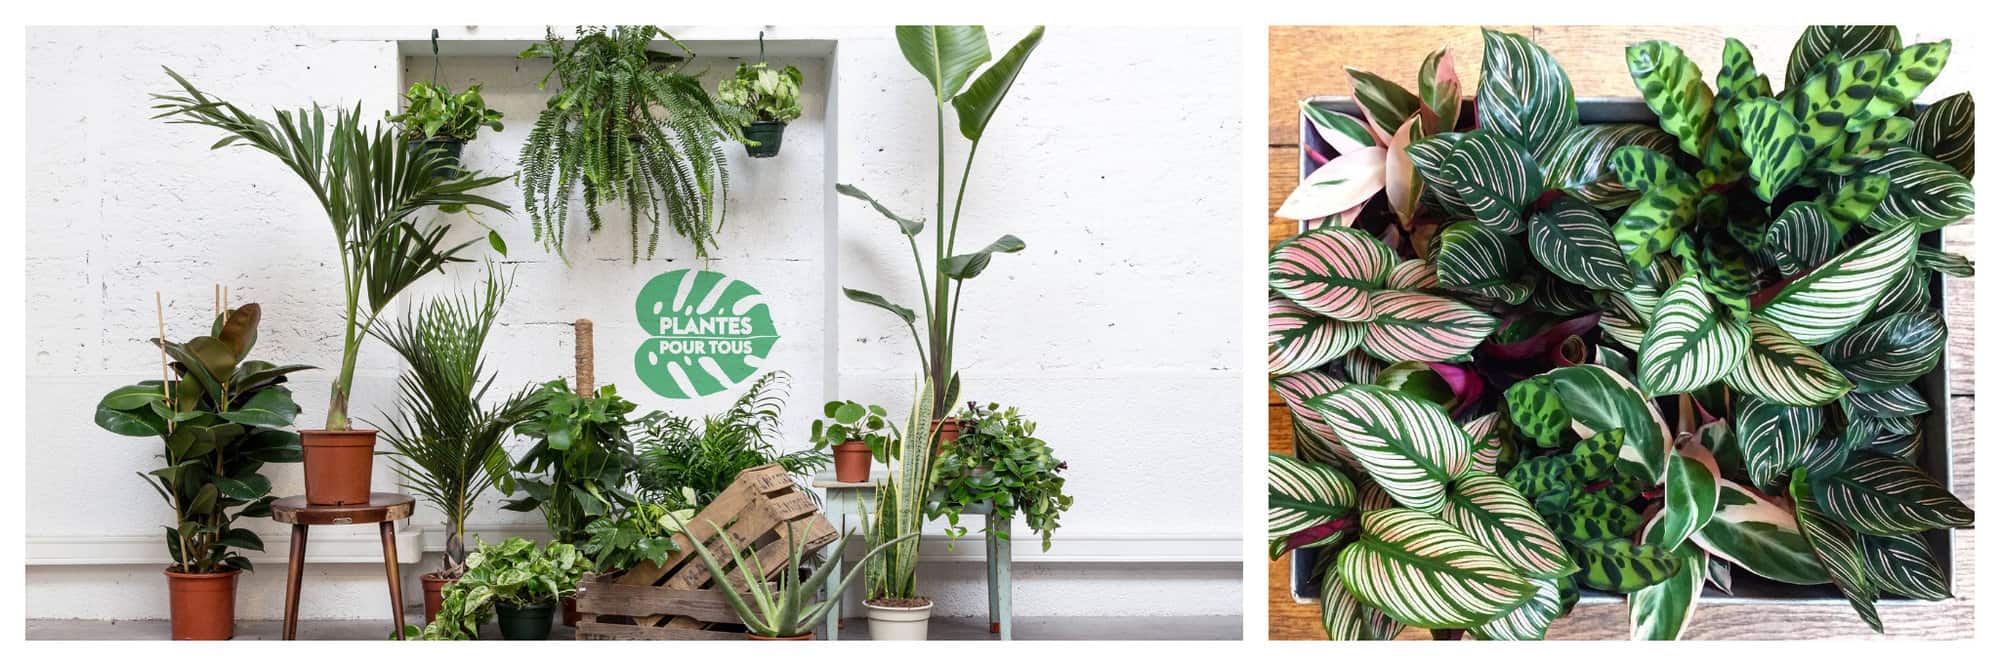 Left: A picture of different types of plants sold at a Parisian plant store called Plantes Pour Tous, such as rubber plant, bird of paradise plant, monstera, pothos, pilea, and aloe vera. Right: A picture of different kinds of calathea plant in a box from a Parisian plant store called Le Cactus Club.